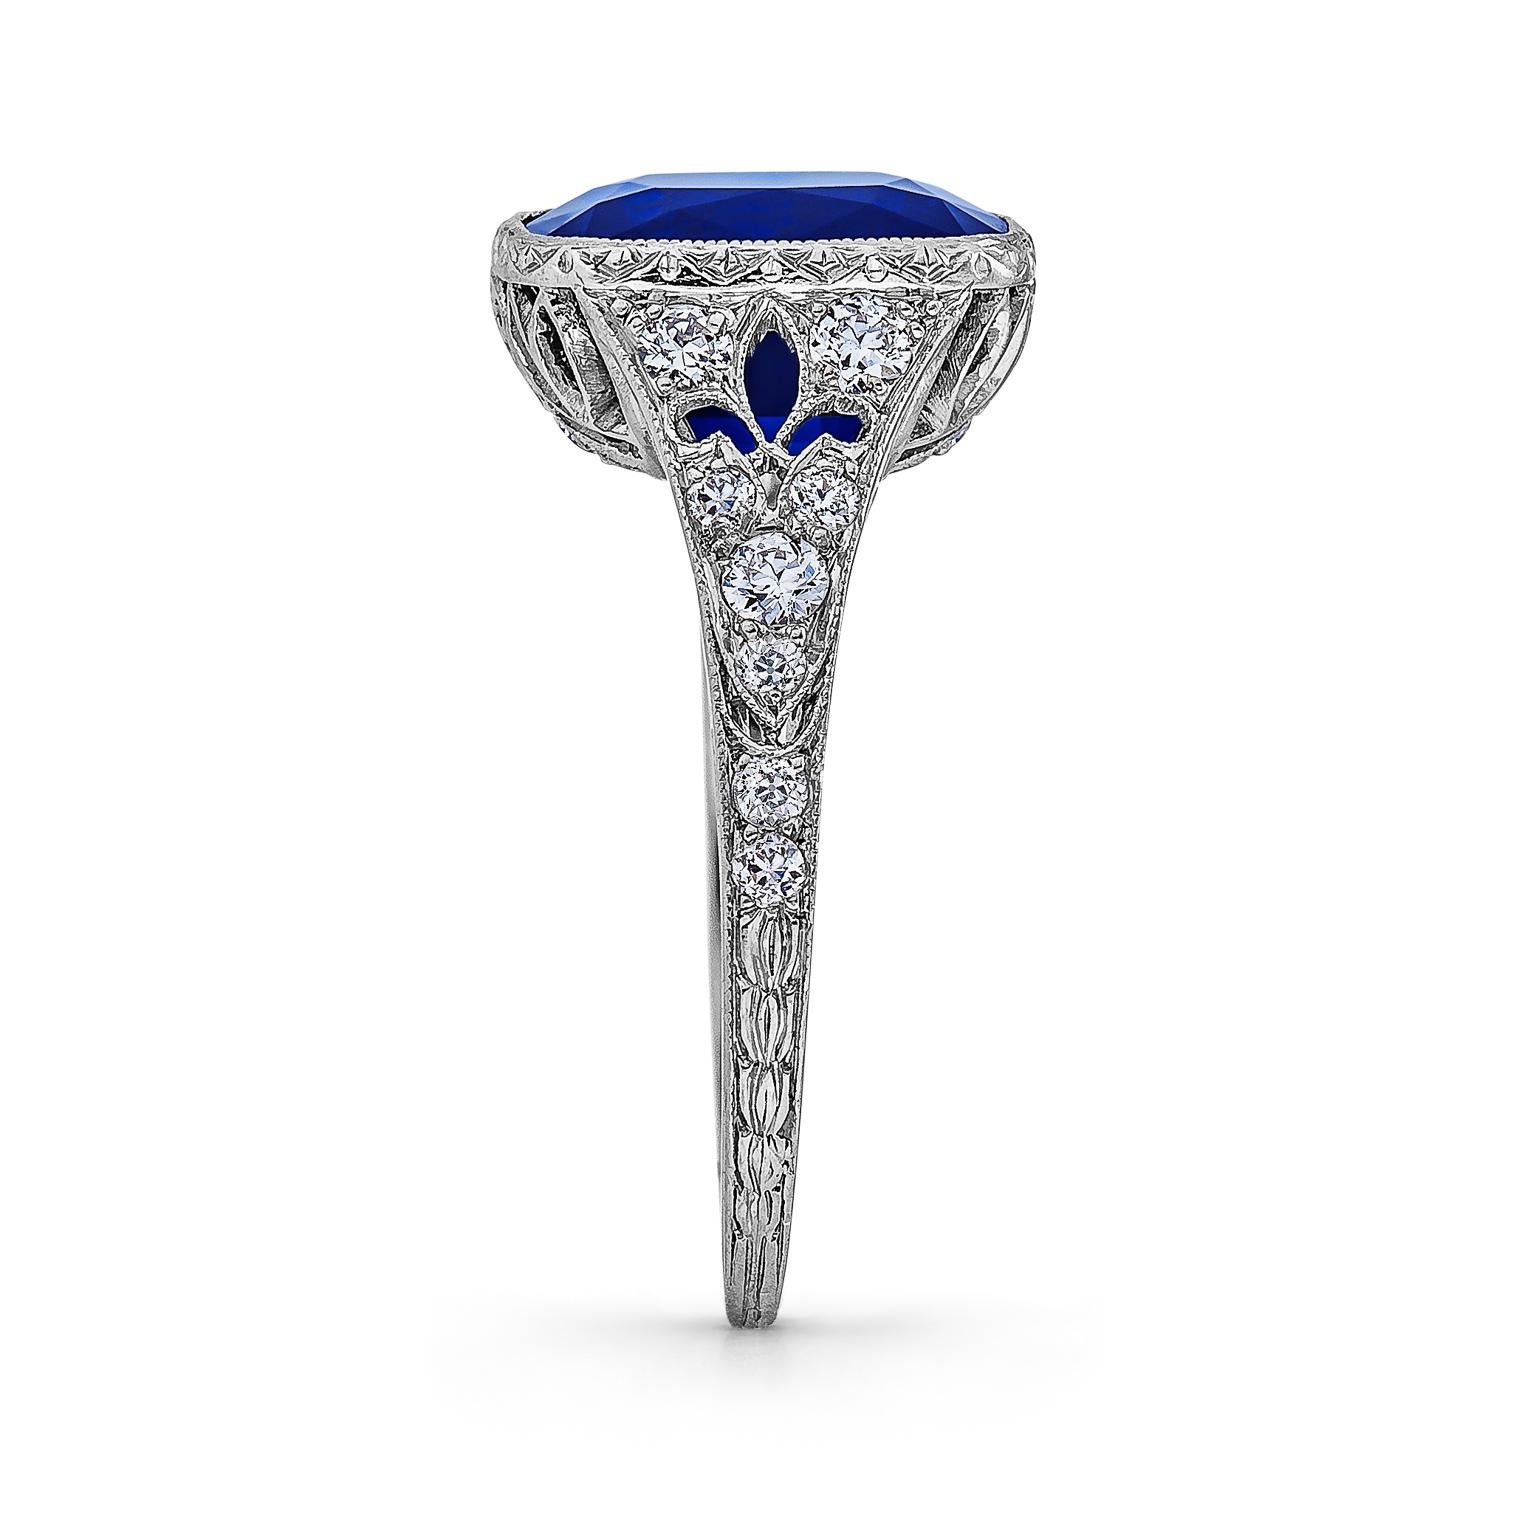 The ultimate in grace and elegance this Tiffany & Co. Art Deco Natural Kashmir antique cushion cut sapphire diamond and platinum ring is simply breathtaking. With a wearable proportion and a rich velvet blue color, the estimated 5.00 carat center